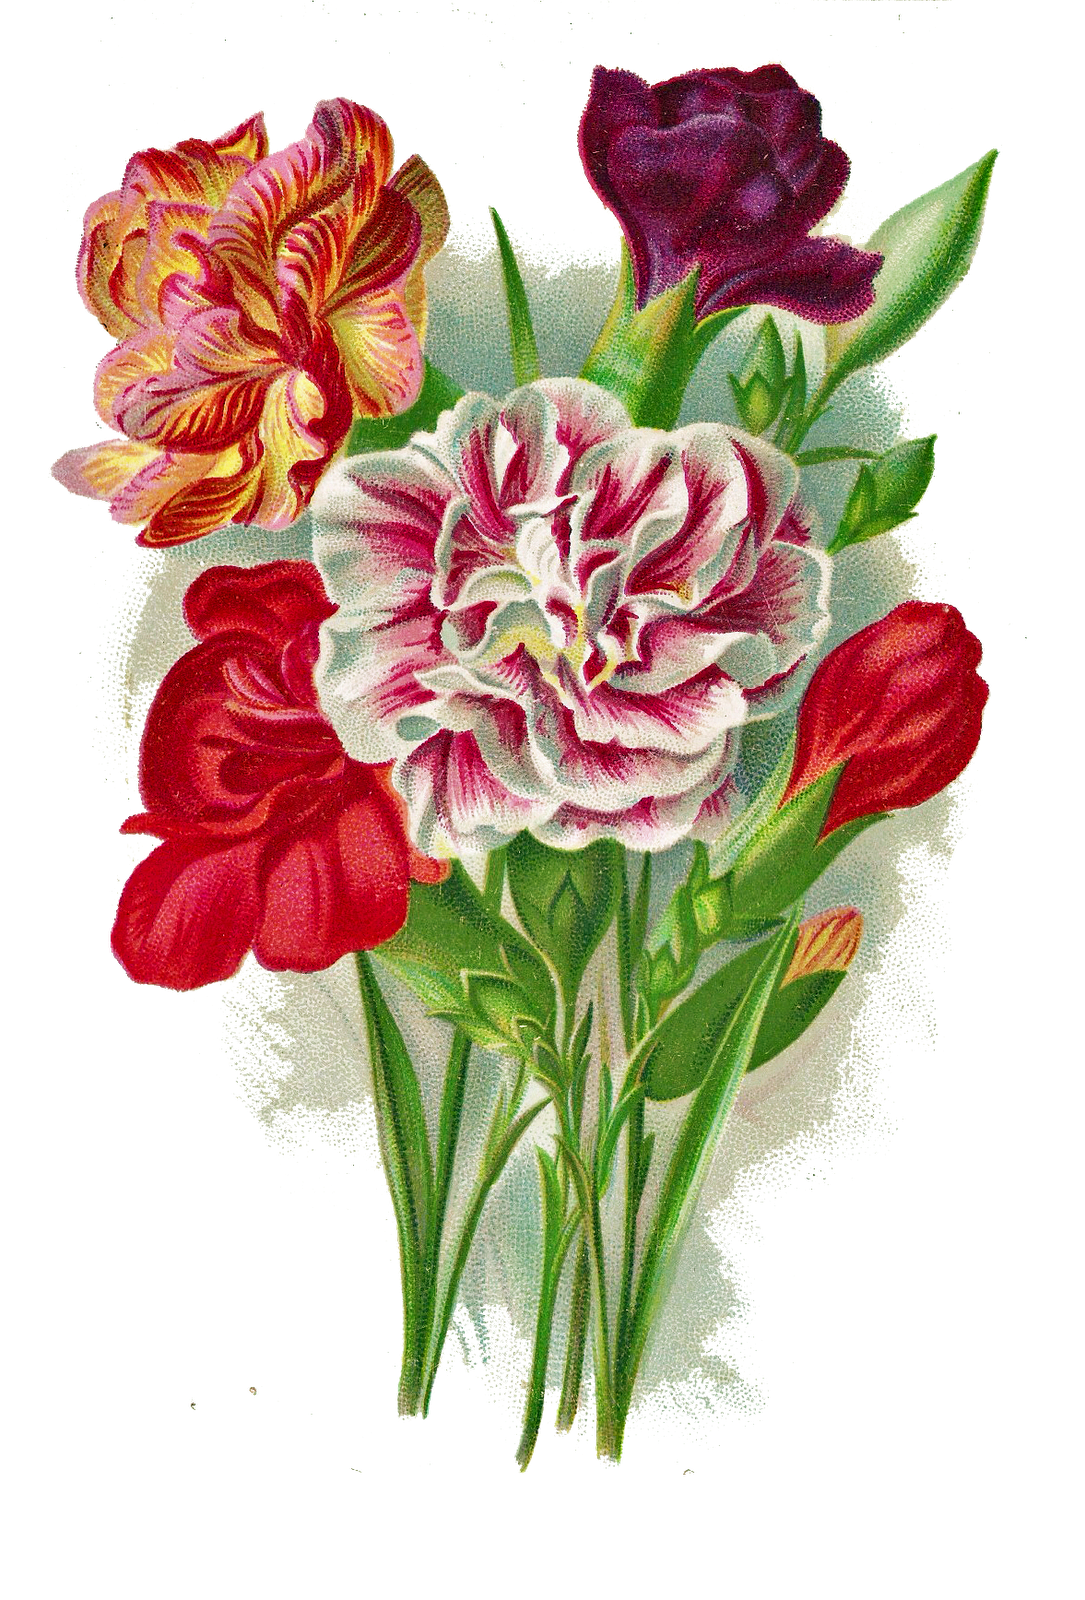 Leaping Frog Designs: Vintage Carnation Bouquet Free PNG Image